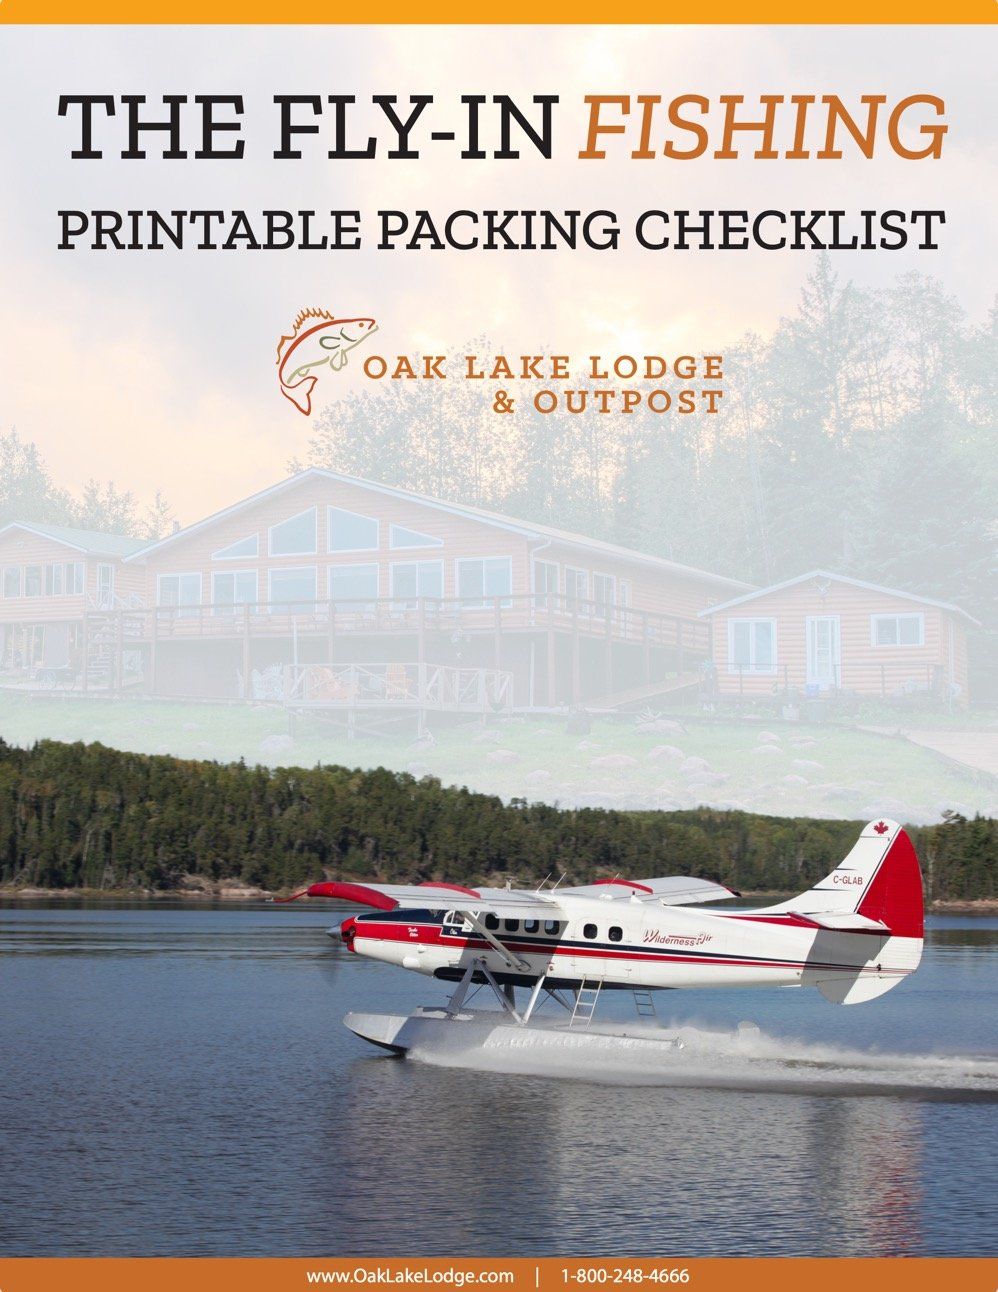 Printable Packing List for your fly-in fishing trip.